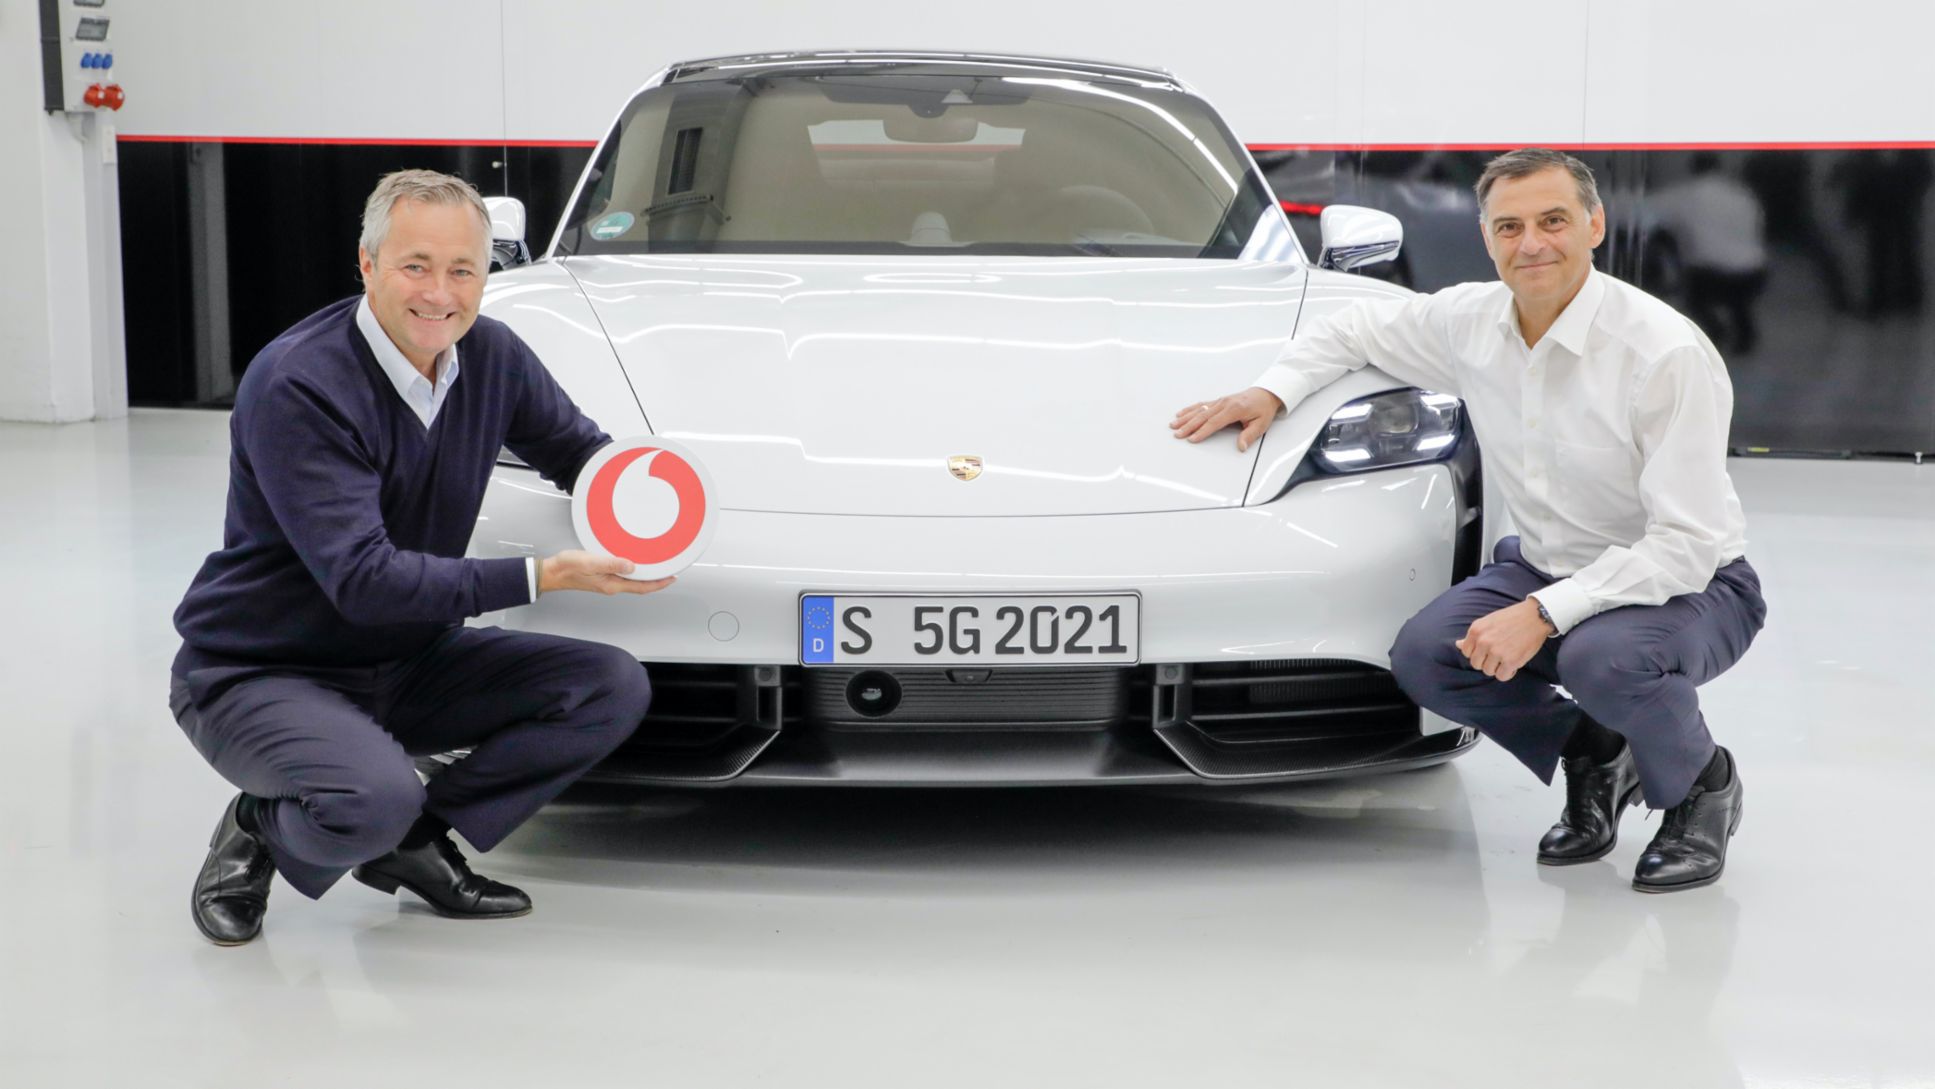 Hannes Ametsreiter, CEO of Vodafone Germany, Michael Steiner, Member of the Executive Board, Research and Development at Porsche, l-r, Taycan, Weissach, 2021, Porsche AG